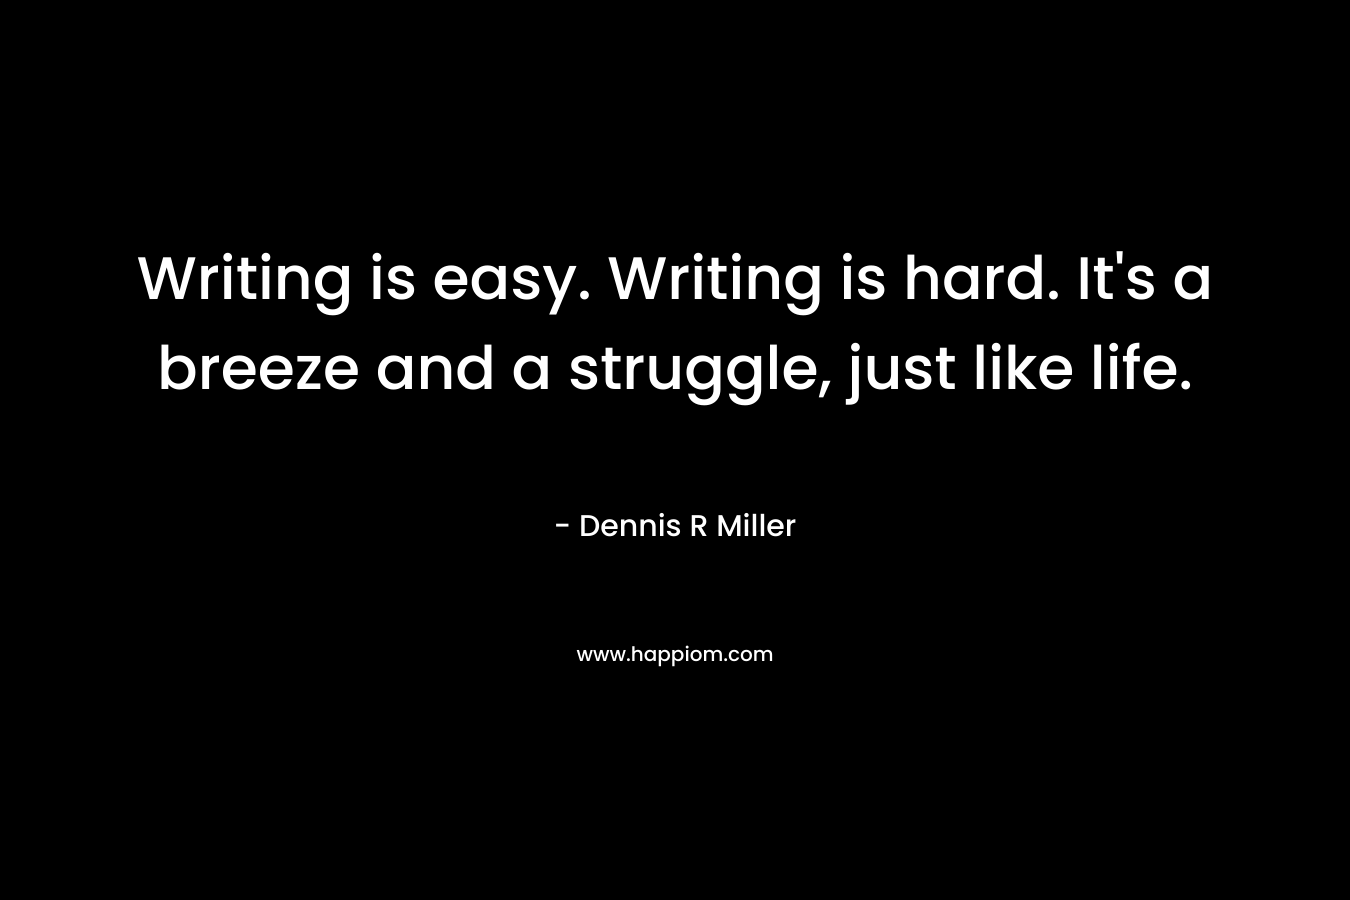 Writing is easy. Writing is hard. It’s a breeze and a struggle, just like life. – Dennis R Miller